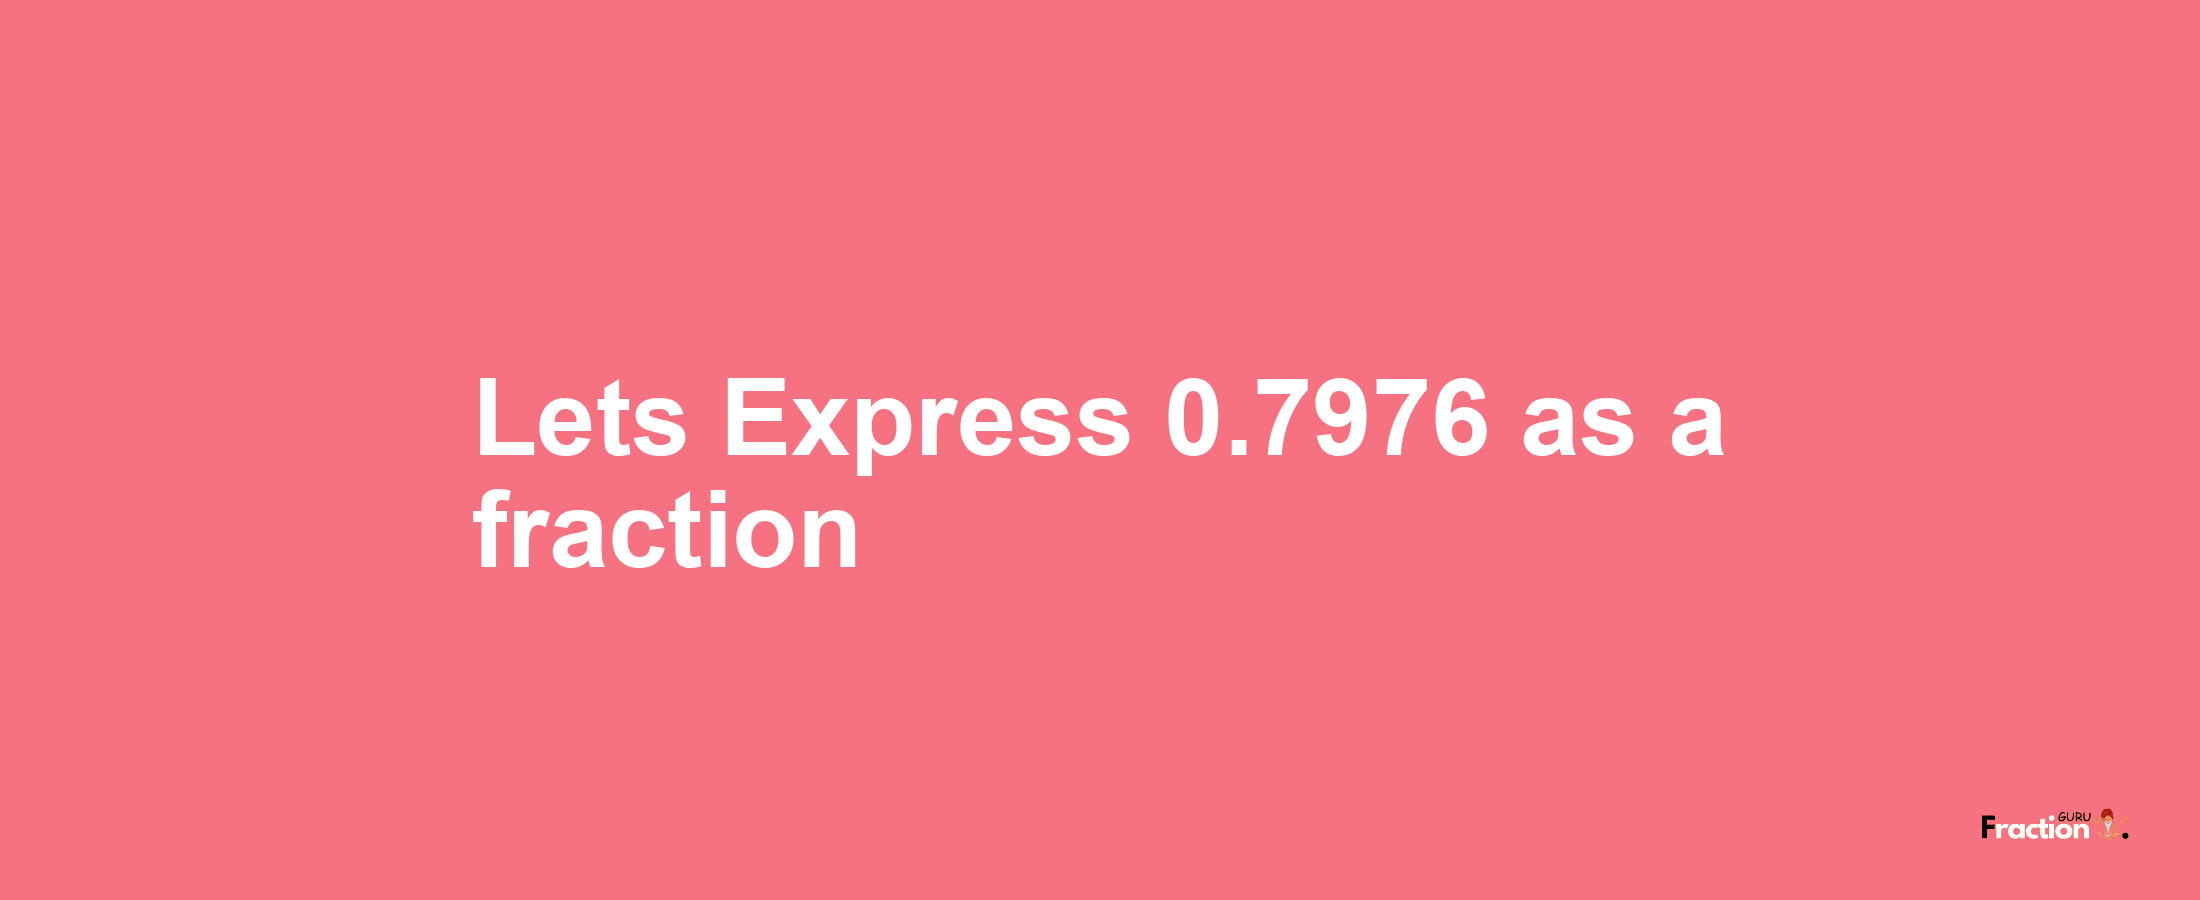 Lets Express 0.7976 as afraction